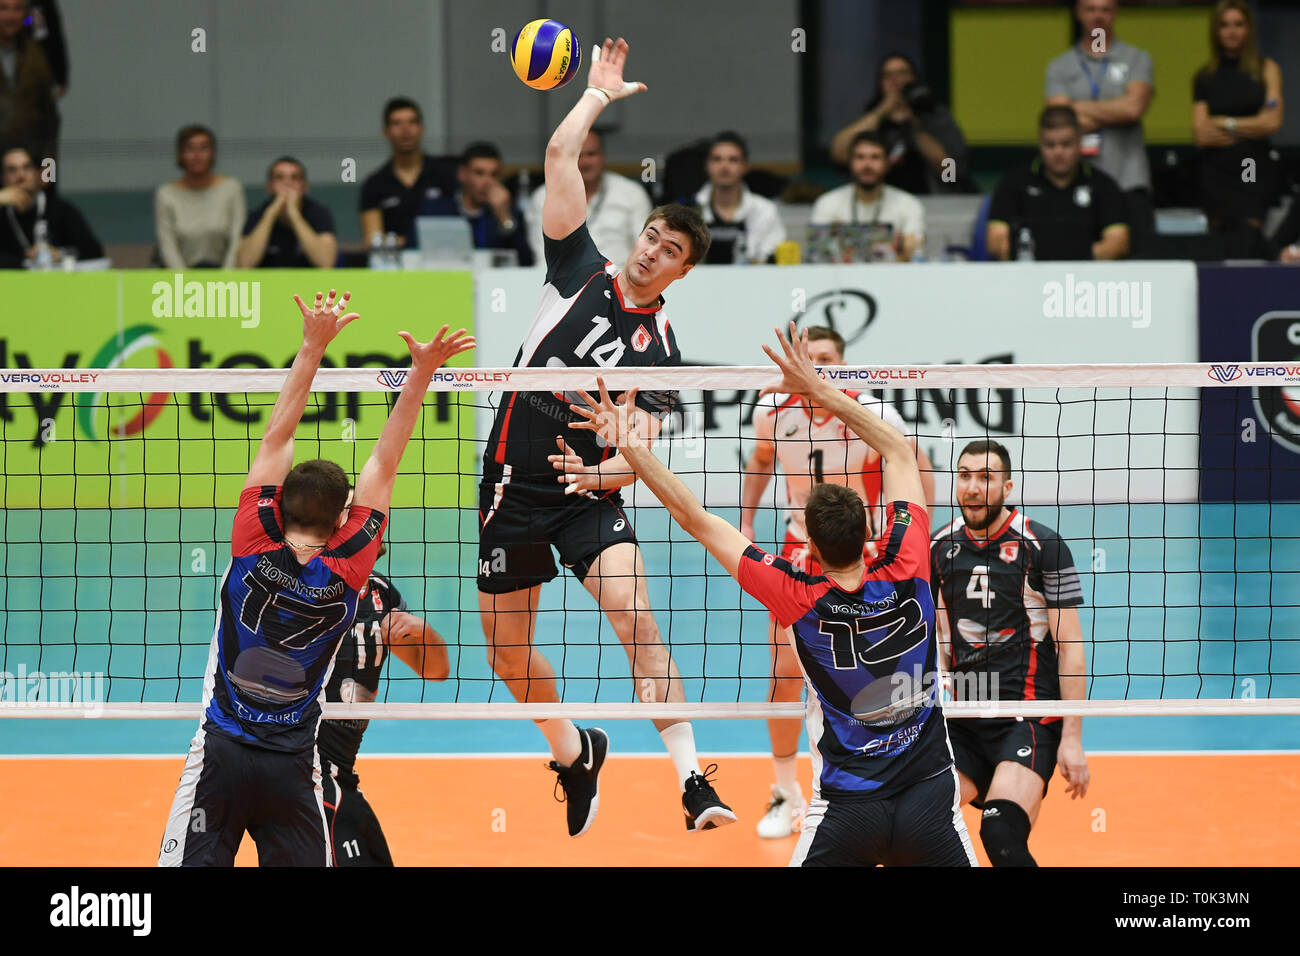 Candy Arena, Monza, Italy. 20th March, 2019. CEV Volleyball Challenge Cup men, Final, 1st leg. Ruslan Khanipov of Belogorie Belgorod during the match between Vero Volley Monza and Belogorie Belgorod at the Candy Arena Italy.  Credit: Claudio Grassi/Alamy Live News Stock Photo